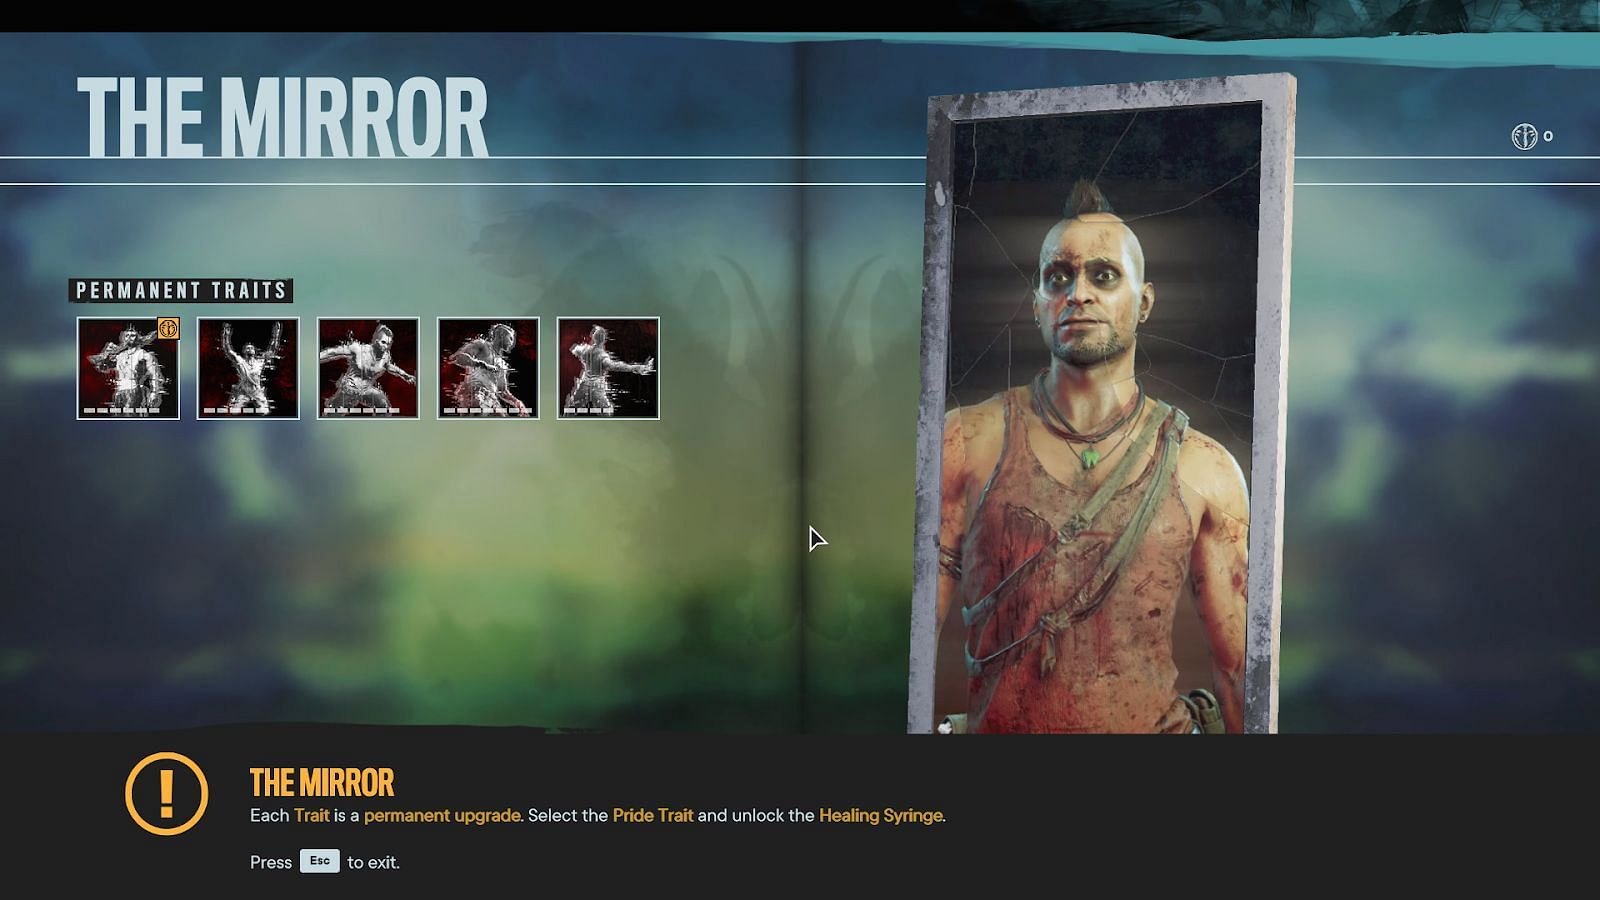 Far Cry 6 Vaas DLC Gets Release Date